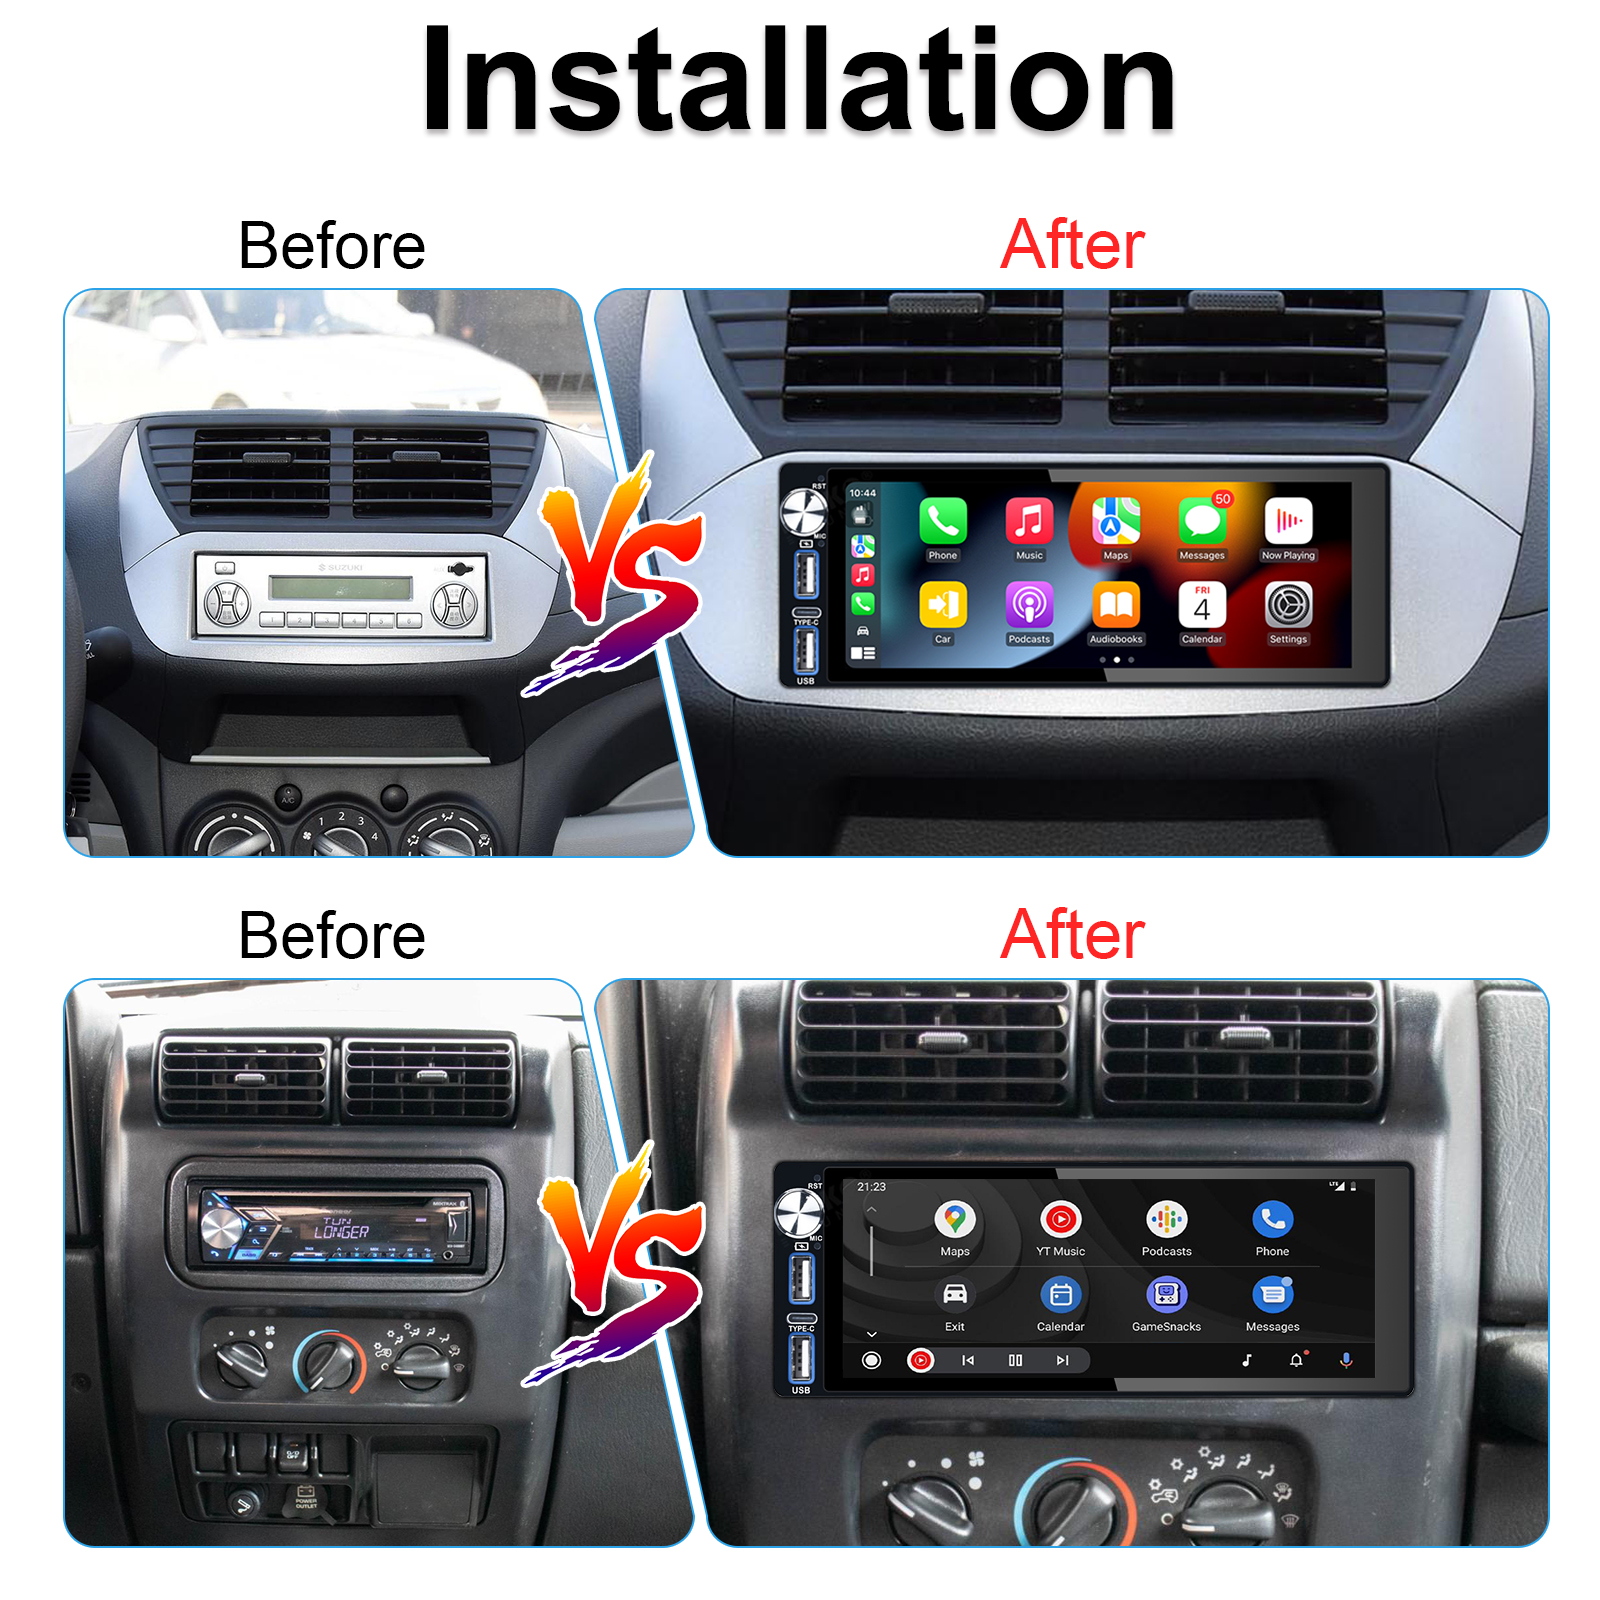 6.9" Touch Bluetooth Single Din Car Stereo For Apple/Android CarPlay With 2GB + 32GB  